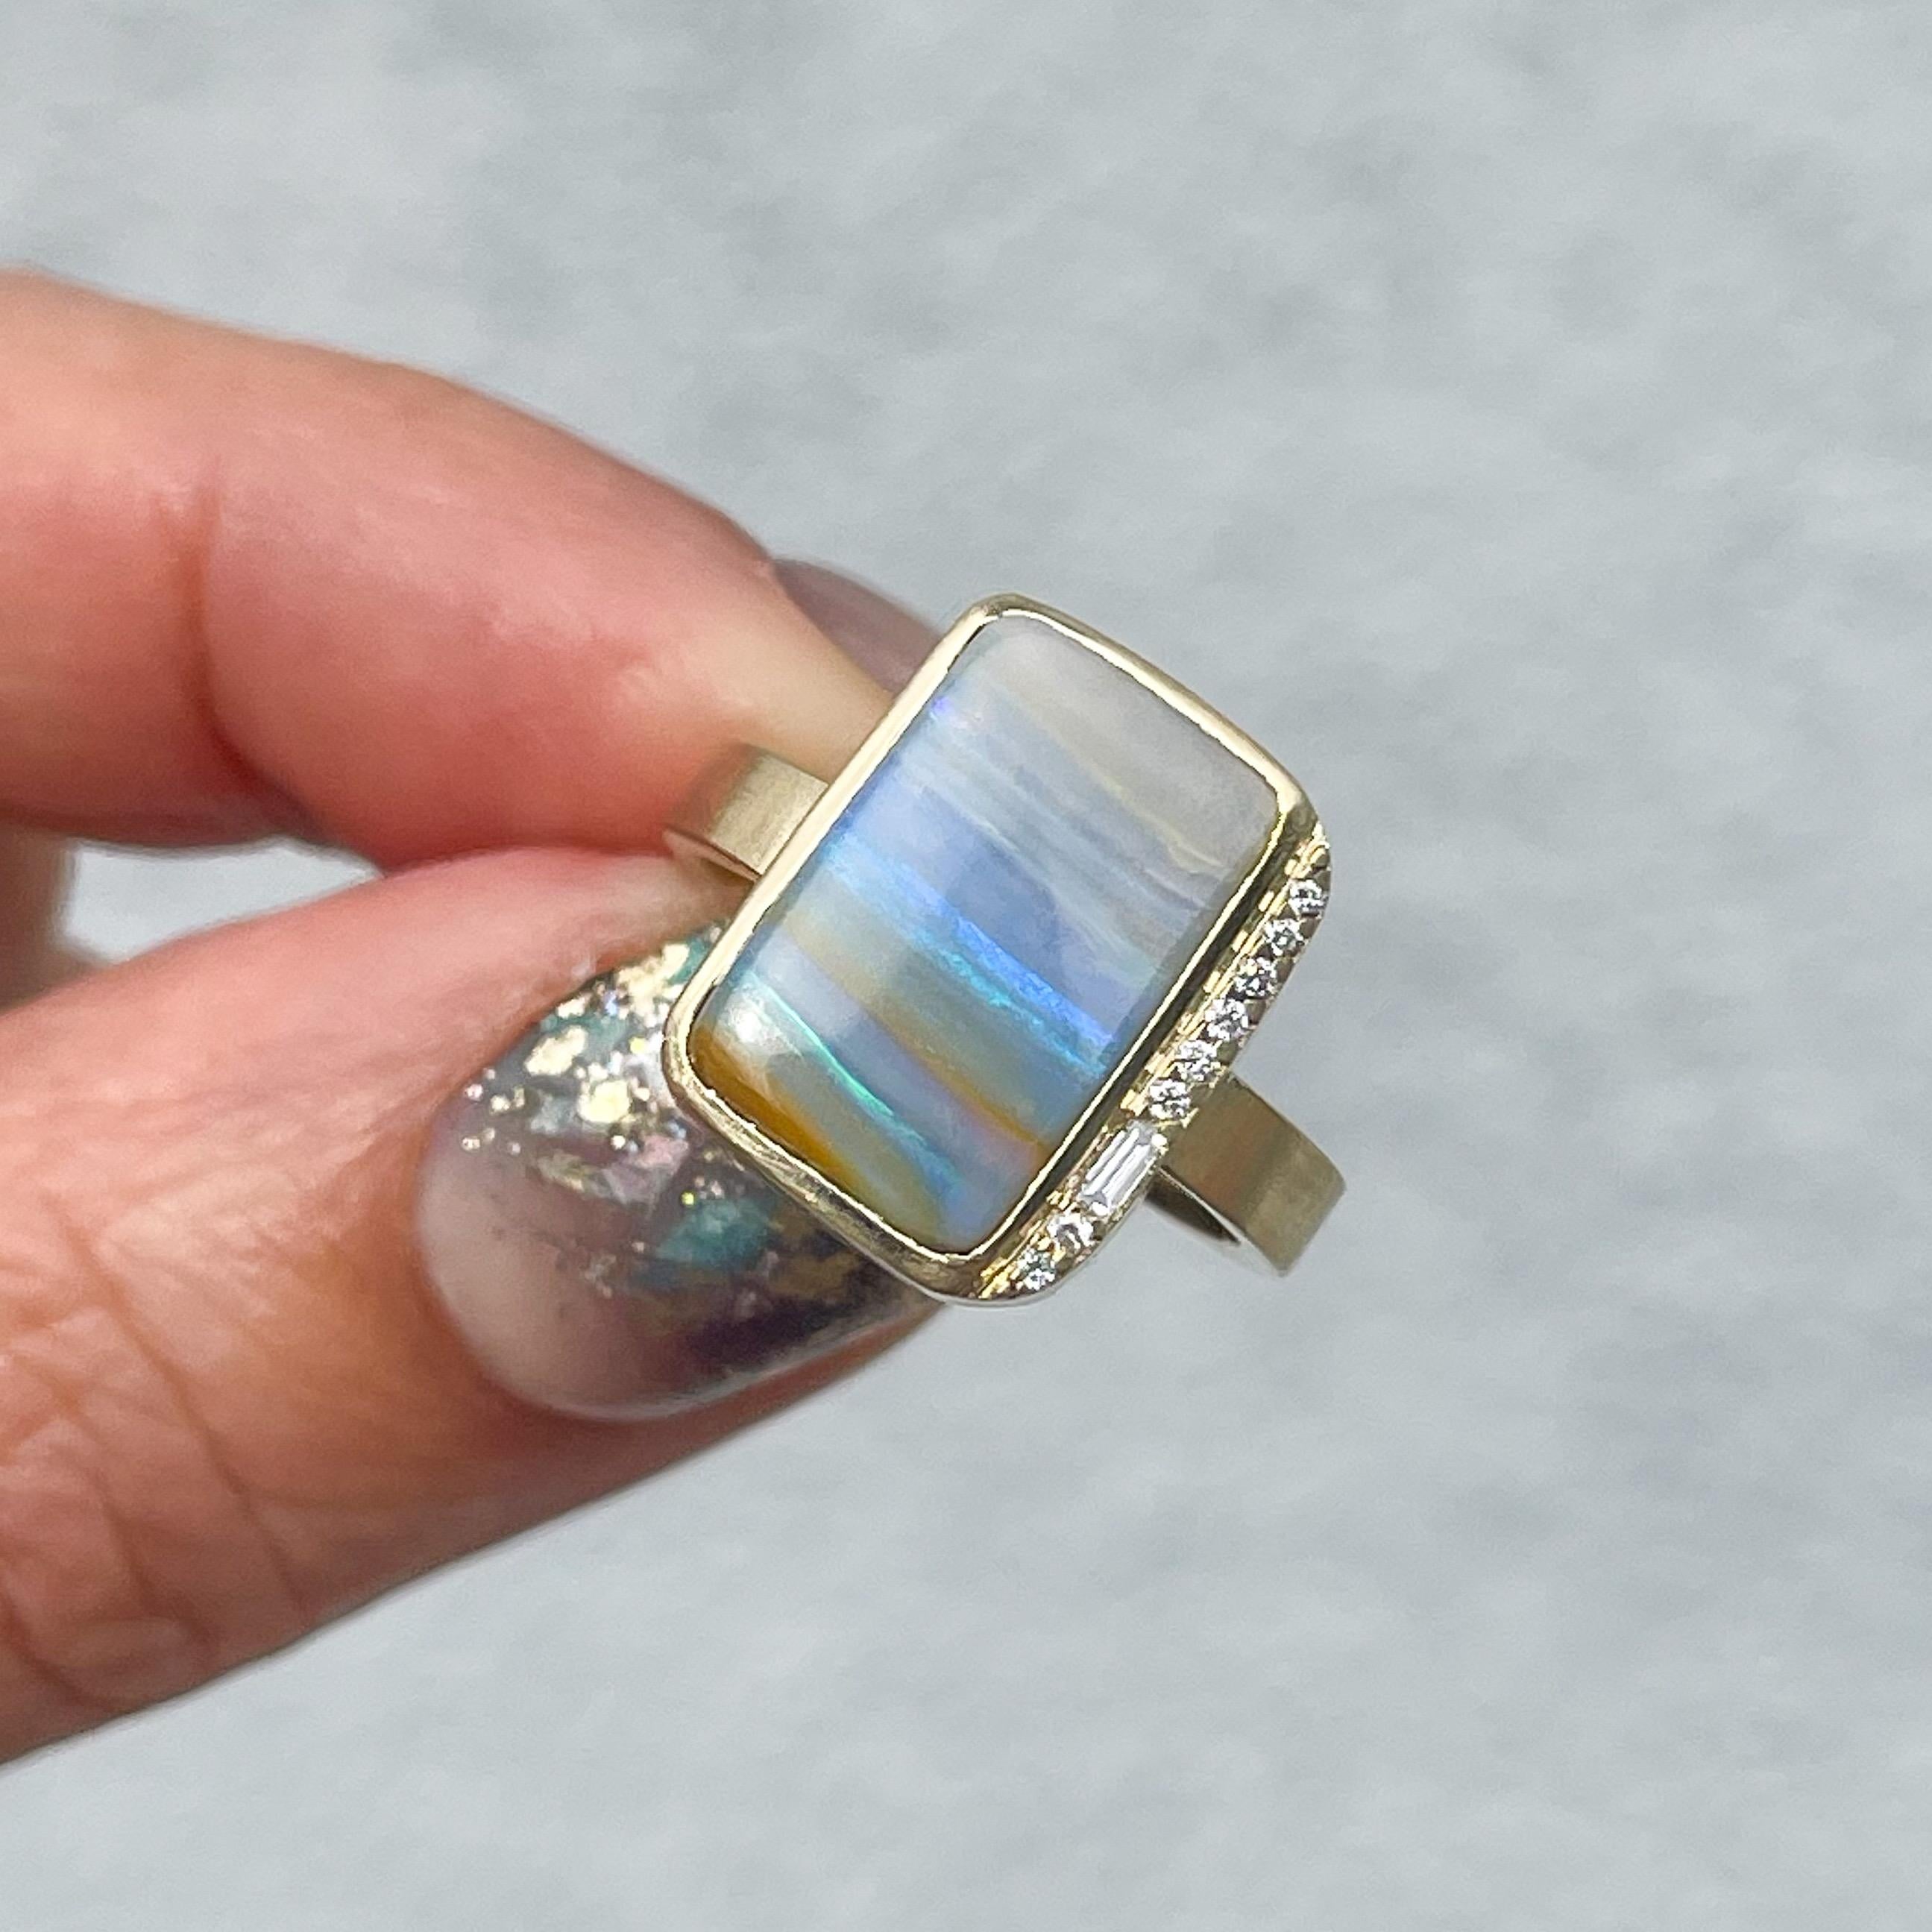 Women's Chantilly Skies Australian Opal Ring with Diamonds in 14k Gold by NIXIN Jewelry For Sale